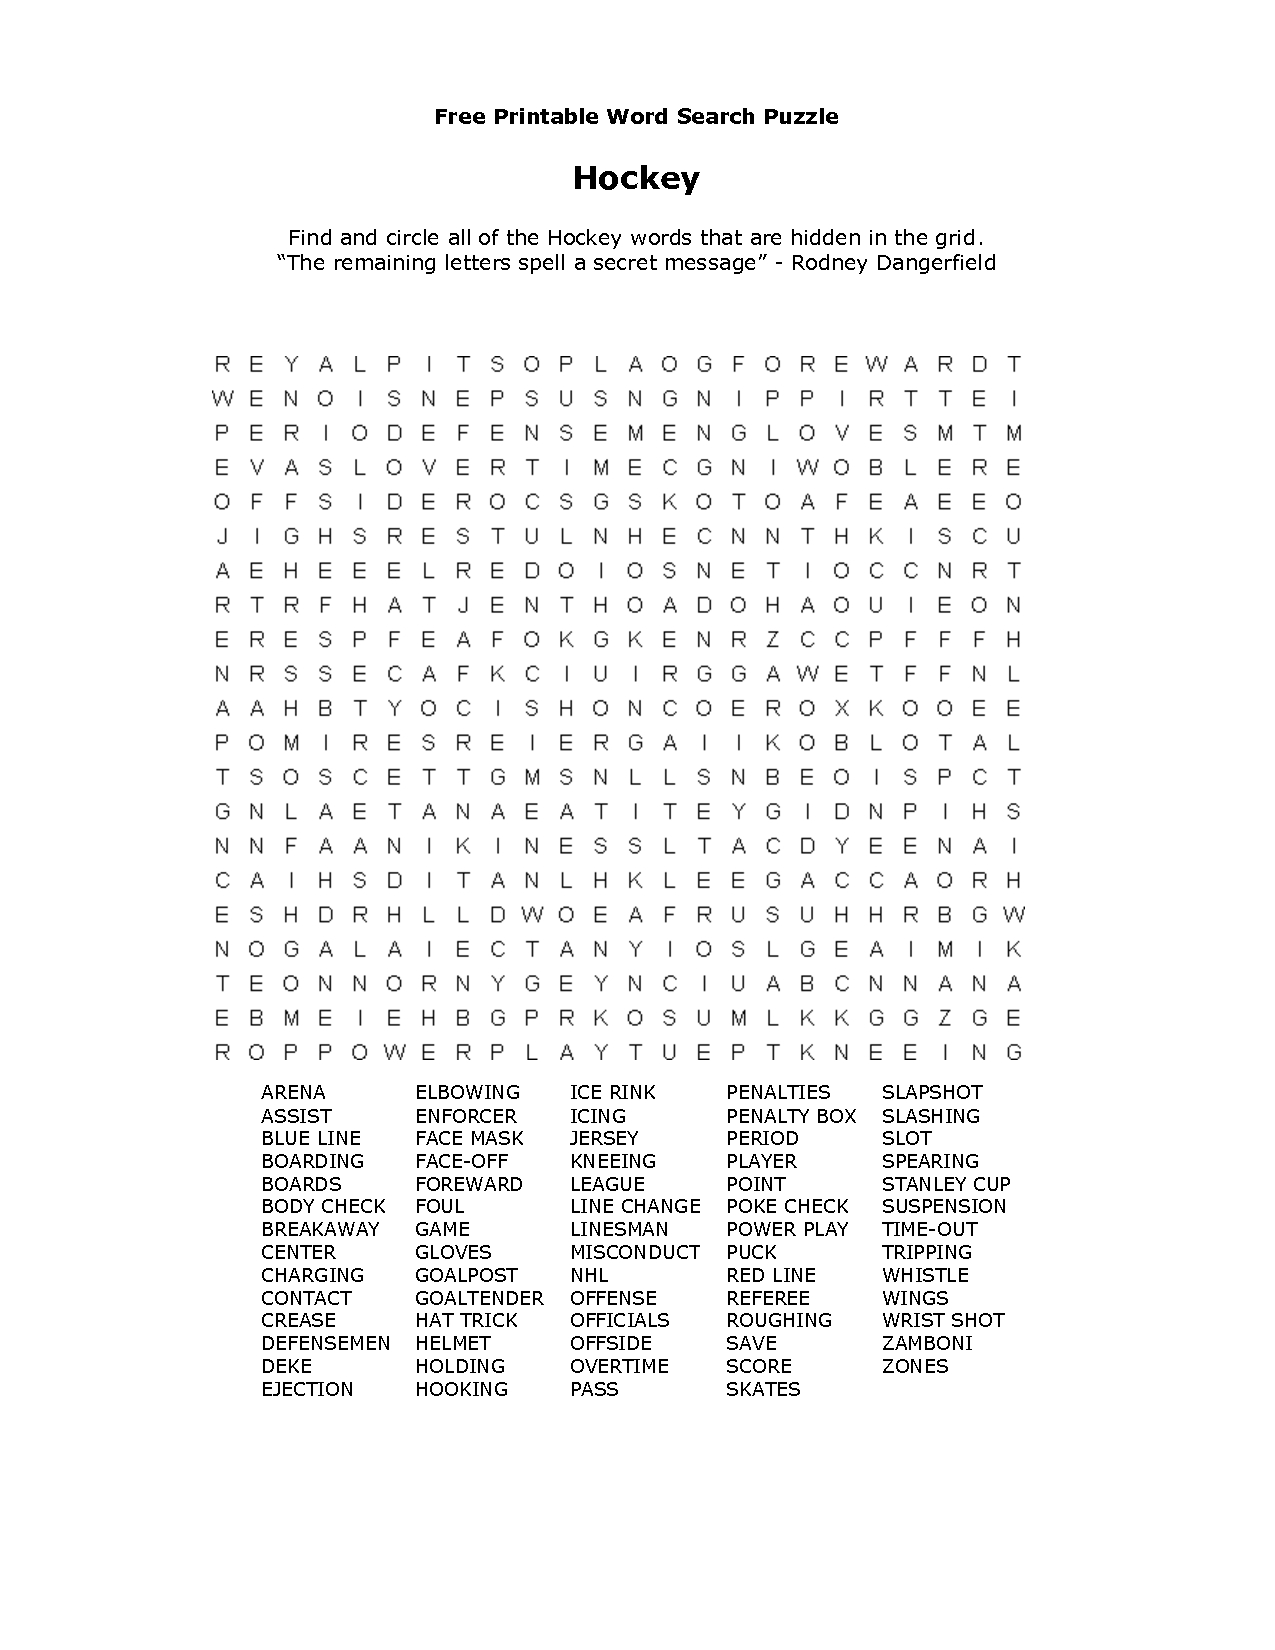 Free Printable Word Searches | طلال | Free Printable Word Searches - Free Printable Word Searches For Kids